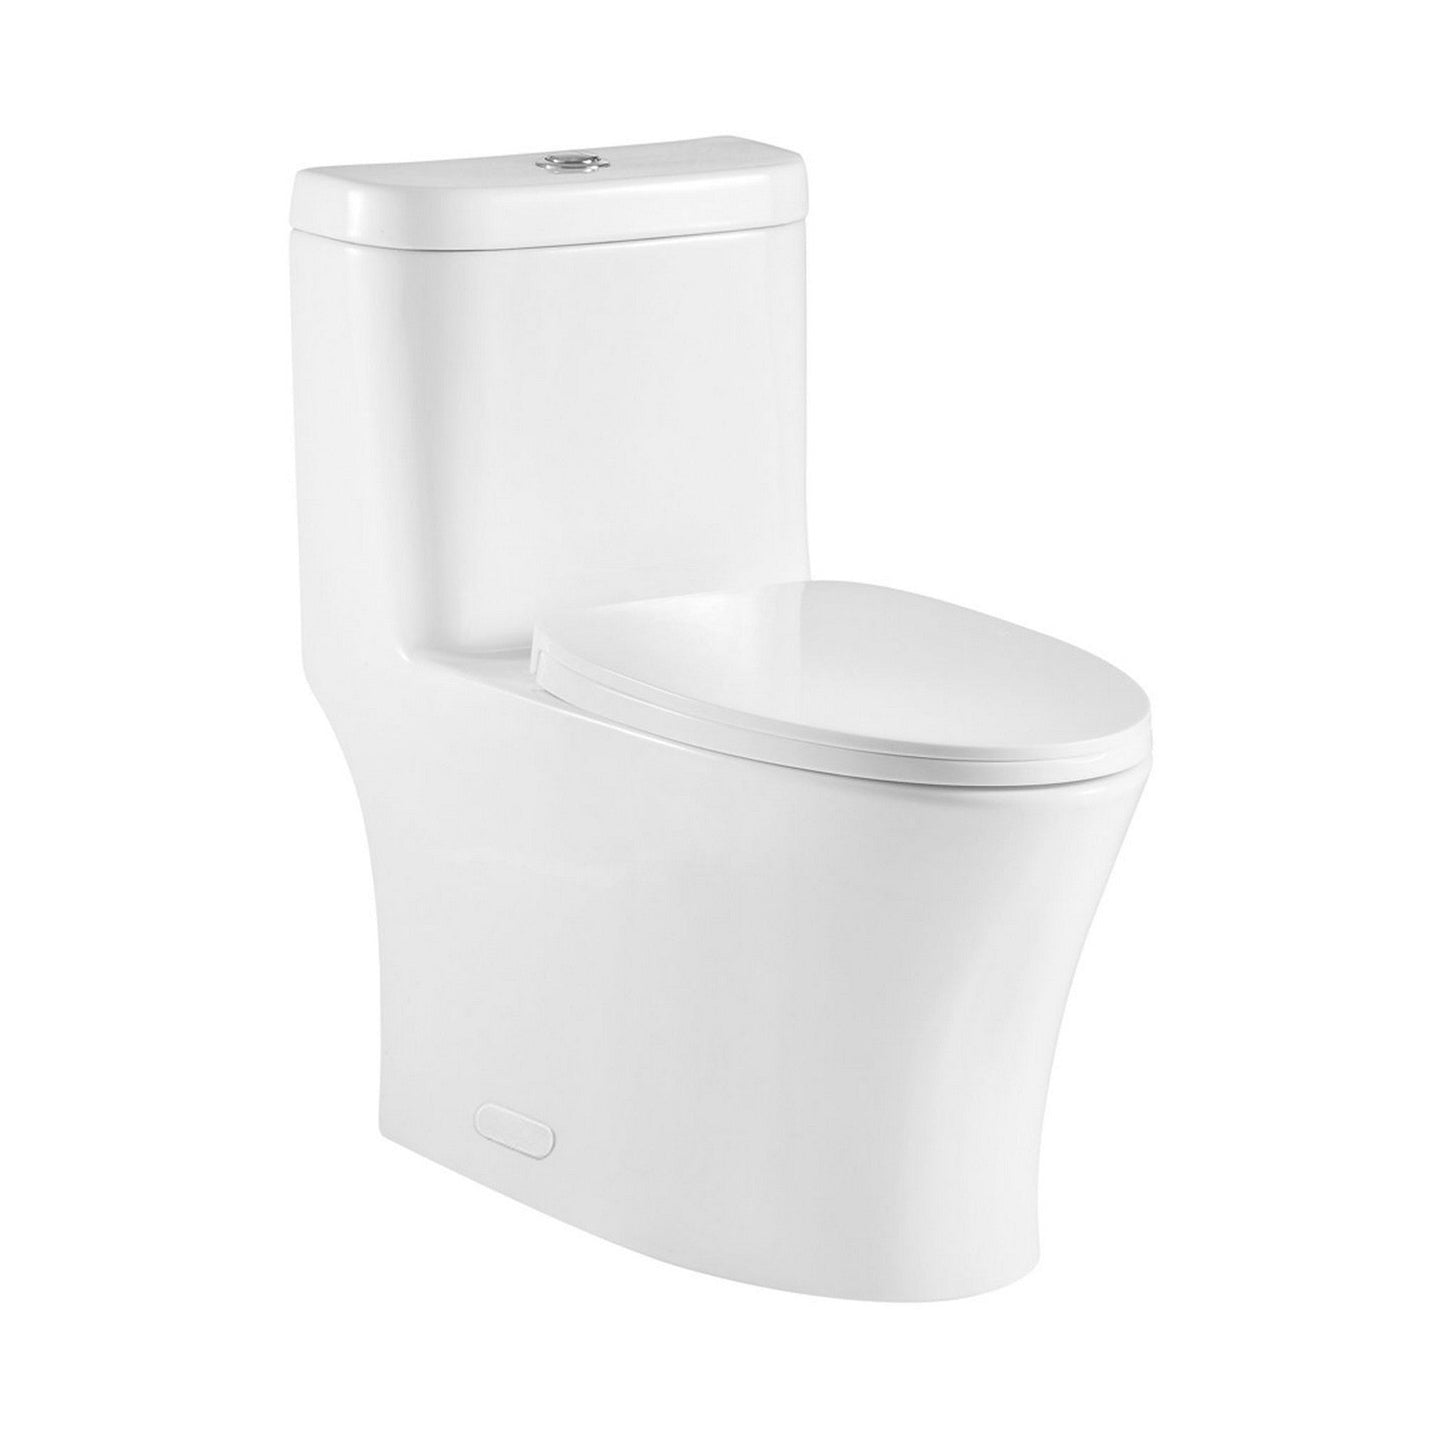 Ratel 16" x 30" White Gloss One-Piece Dual-Flush Floor-Mounted Toilet With Soft-Close Seat